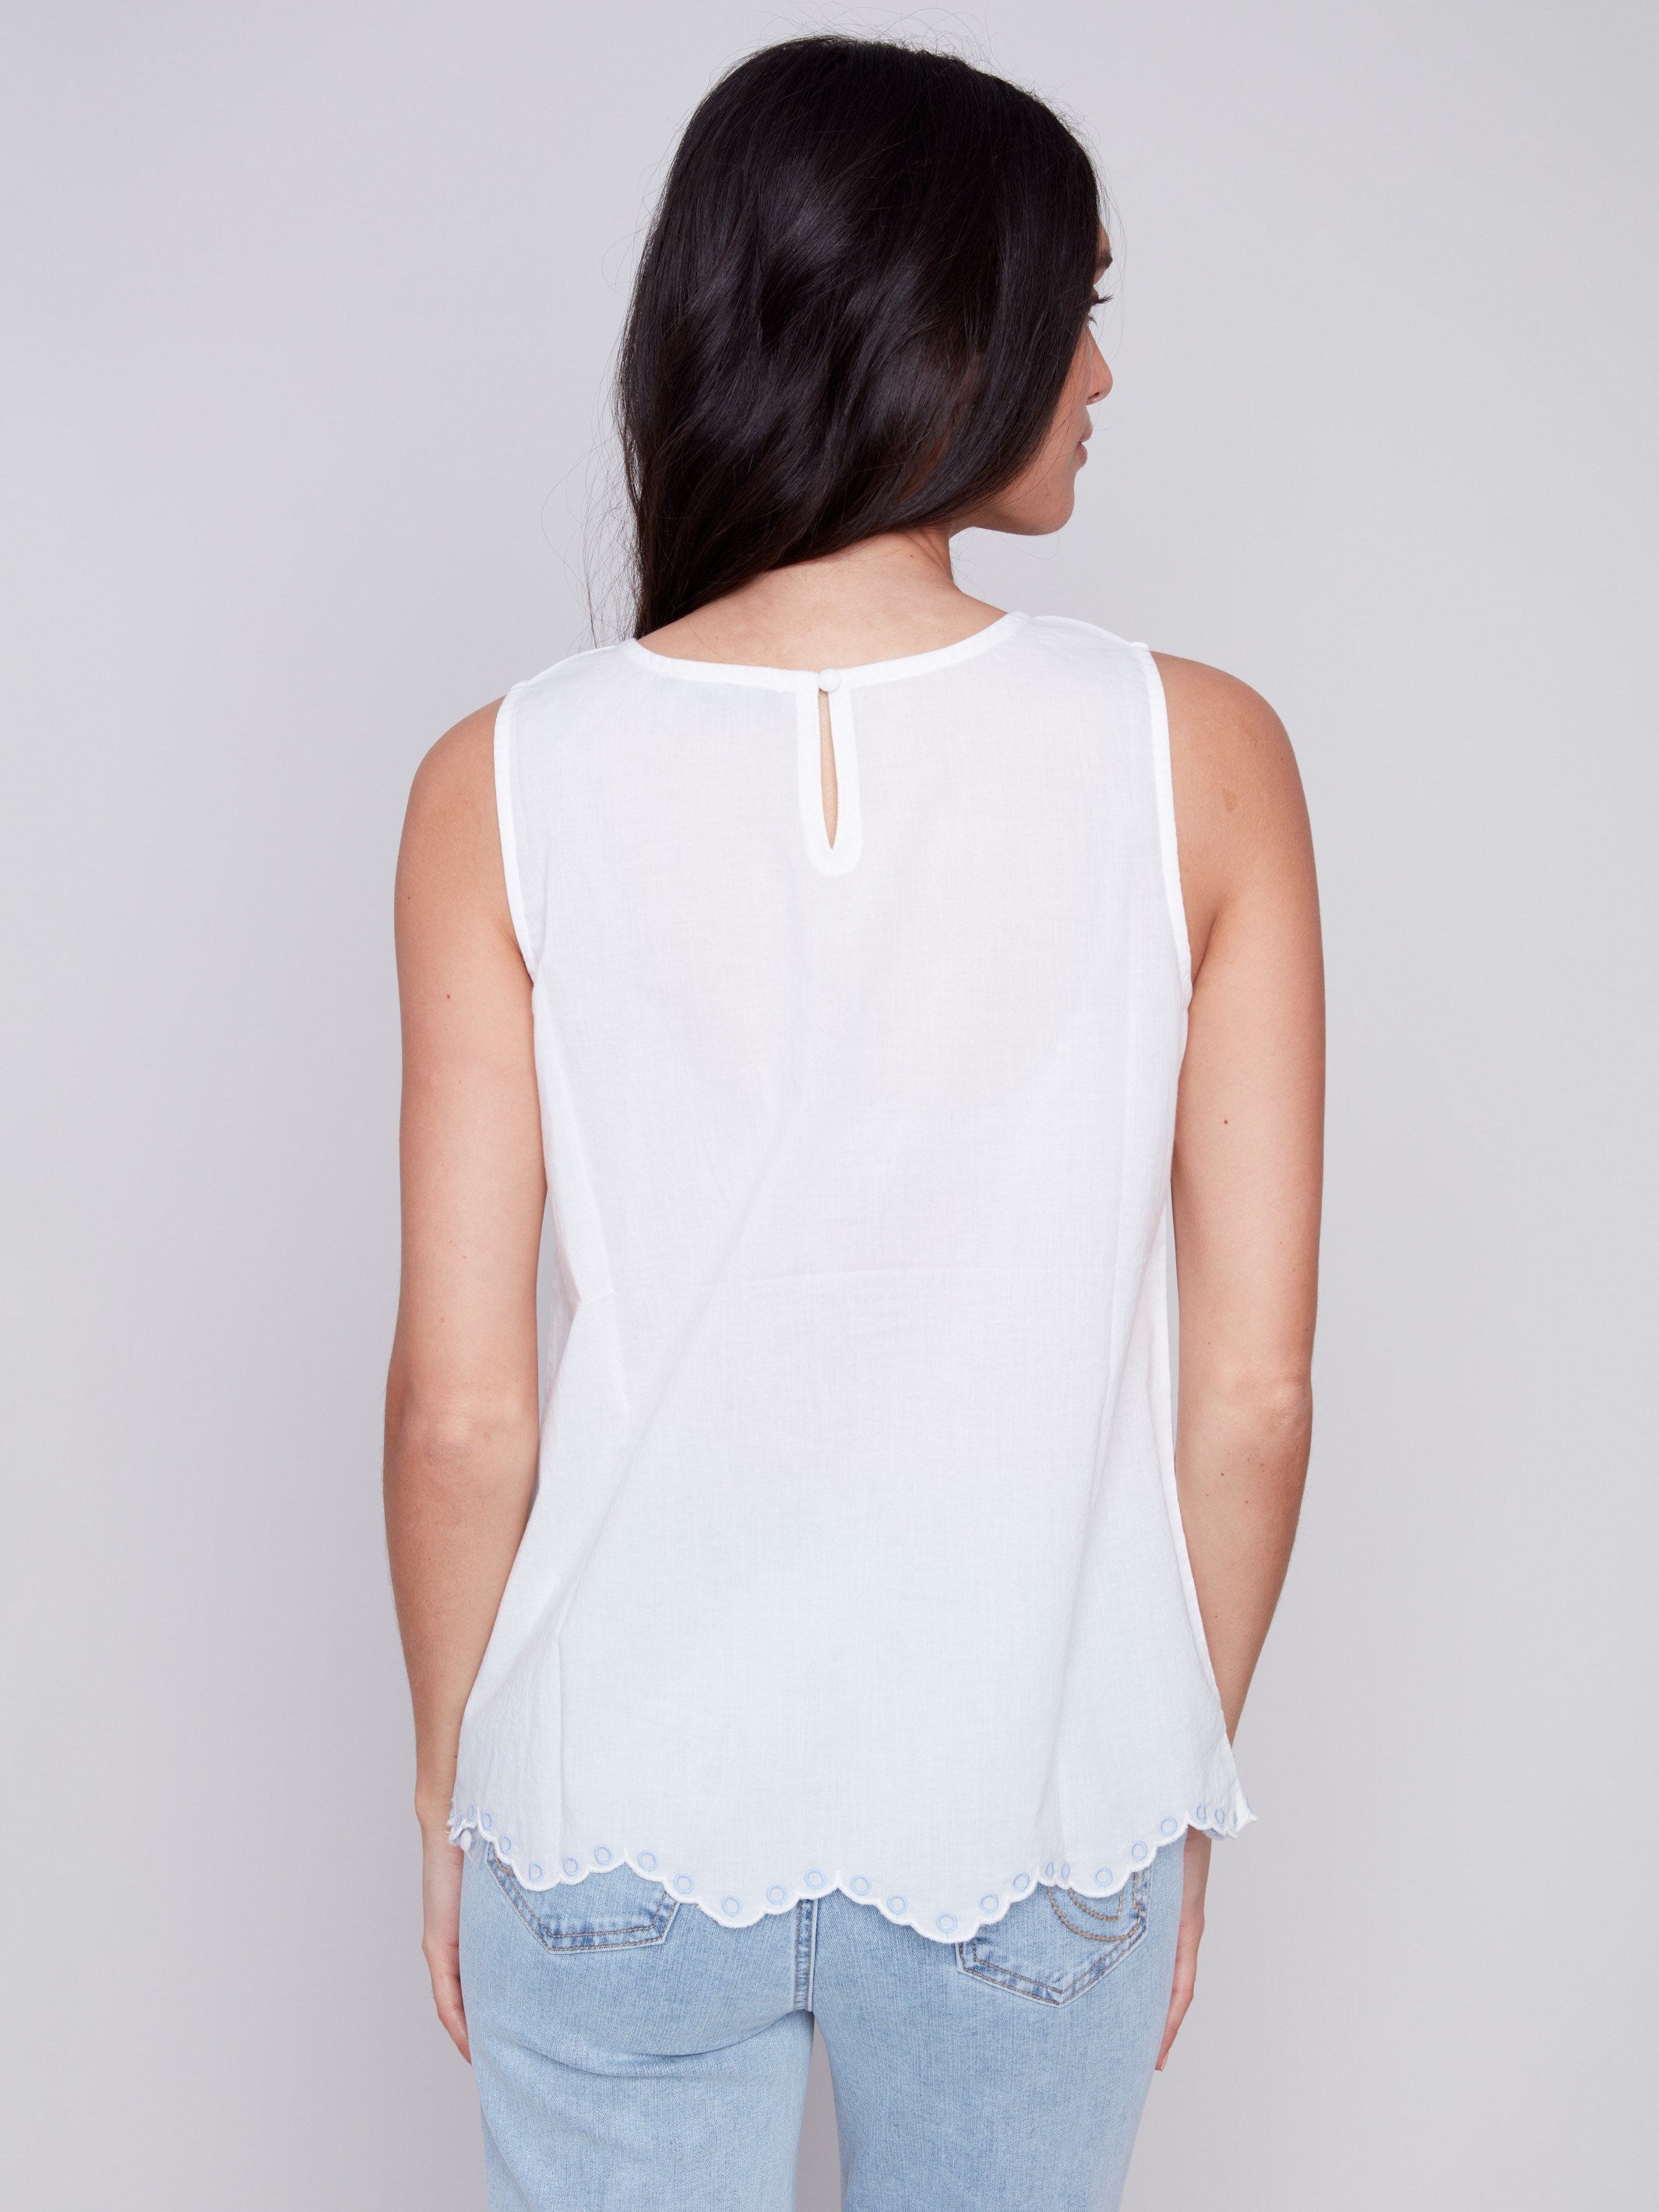 Sleeveless Embroidered Cotton Top - White - Charlie B Collection Canada - Image 2